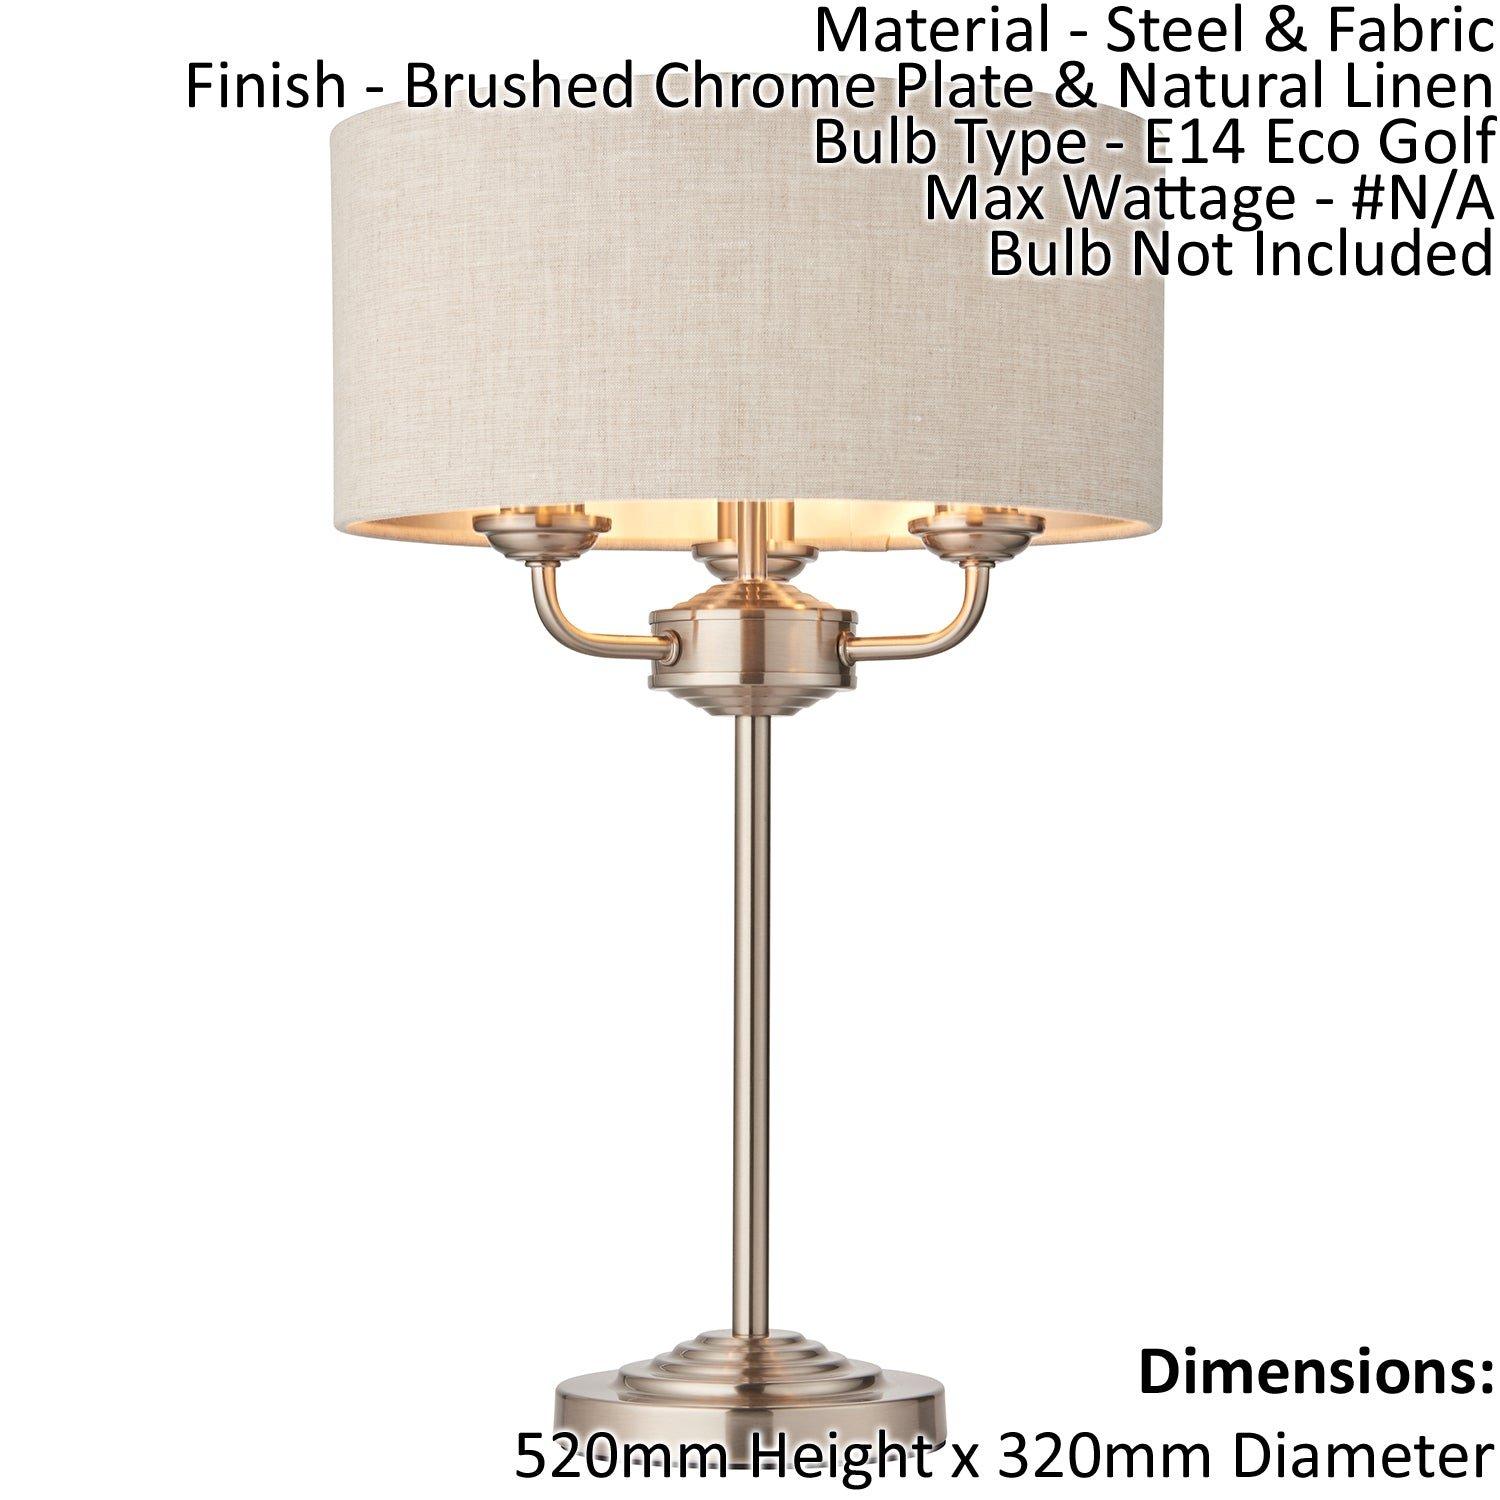 Table Lamp - Brushed Chrome Plate & Natural Linen - 3 x 18W E14 Eco golf